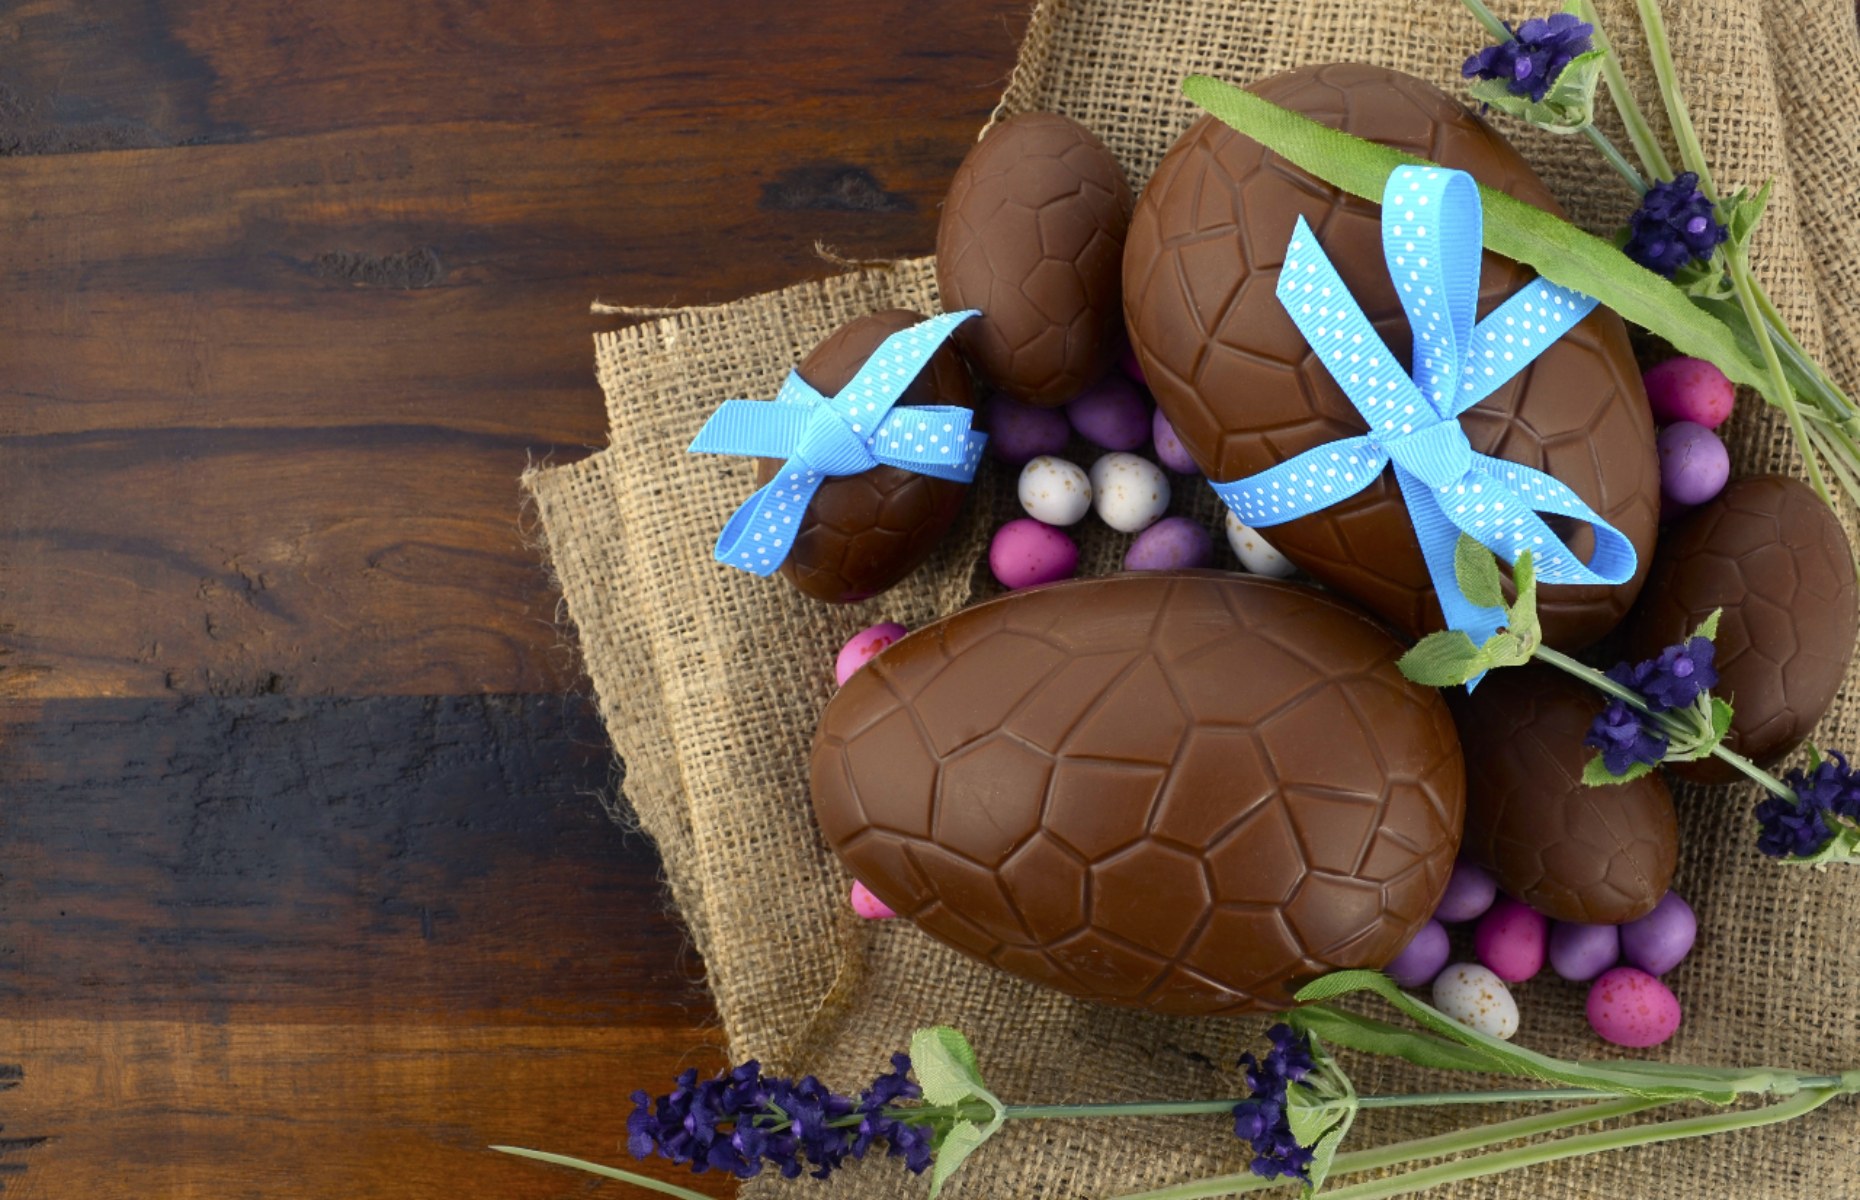 Chocolate Easter eggs (Image: Milleflore Images/Shutterstock)